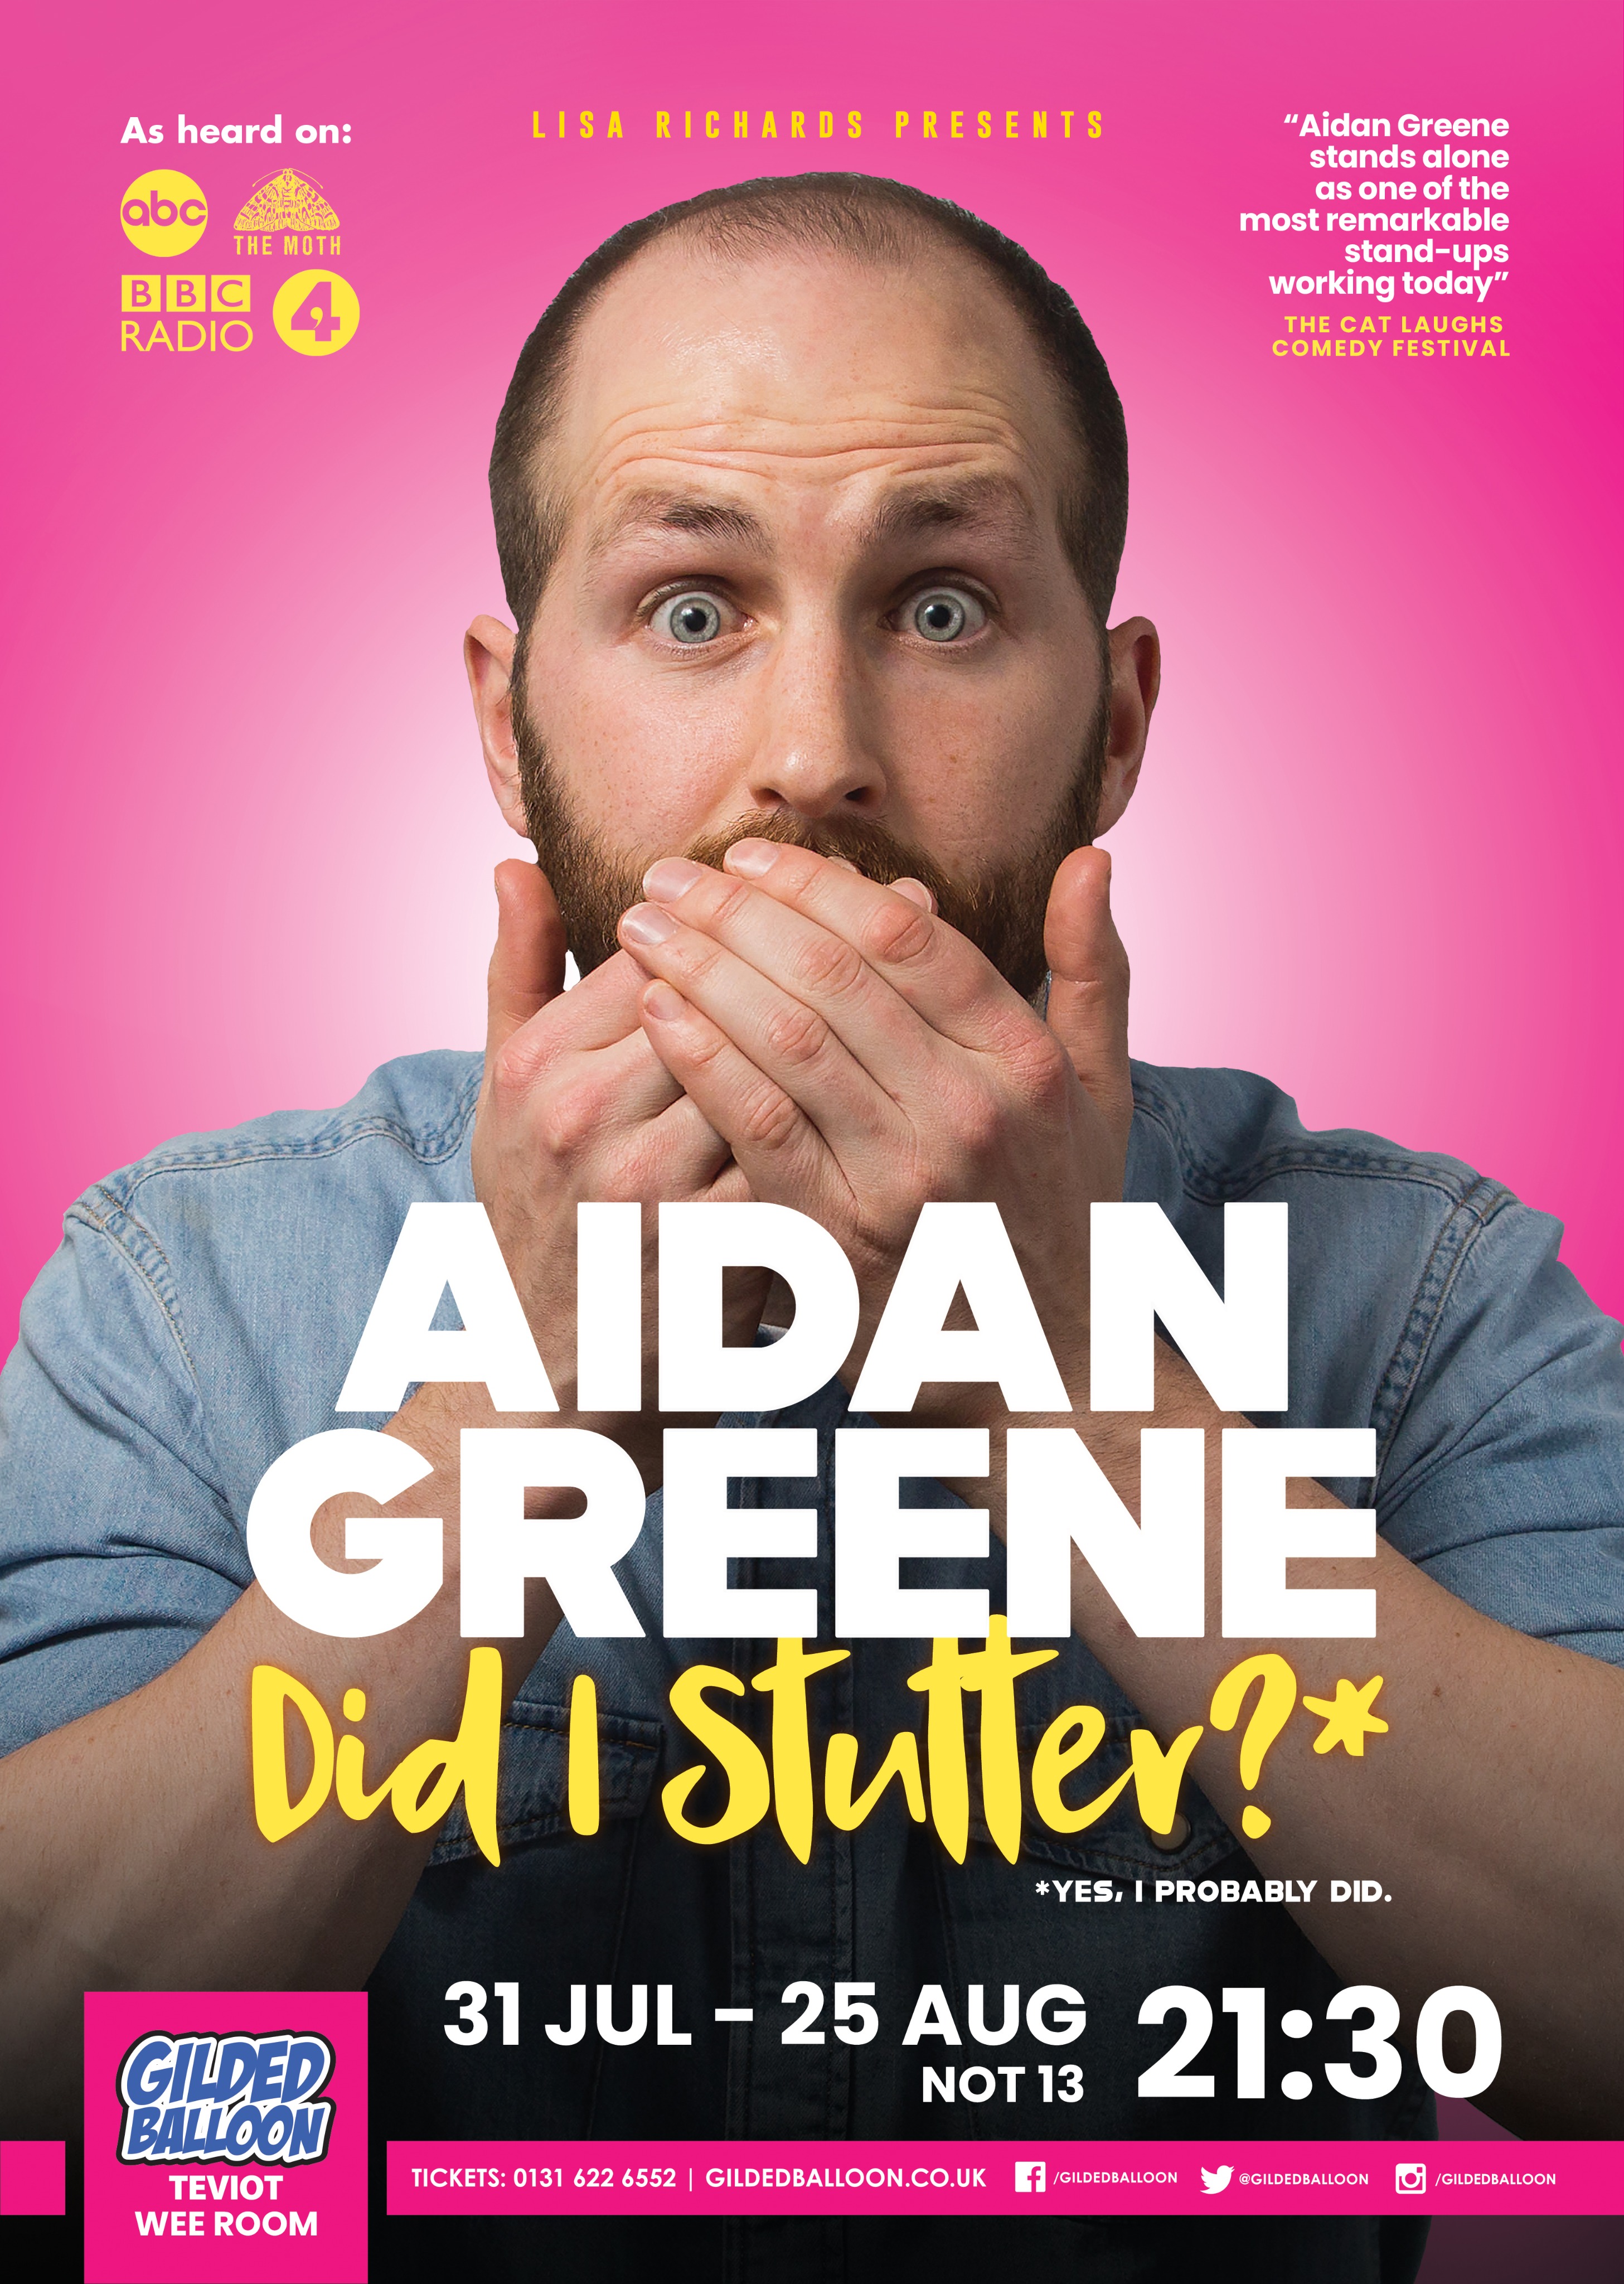 The poster for Aidan Greene: Did I Stutter?